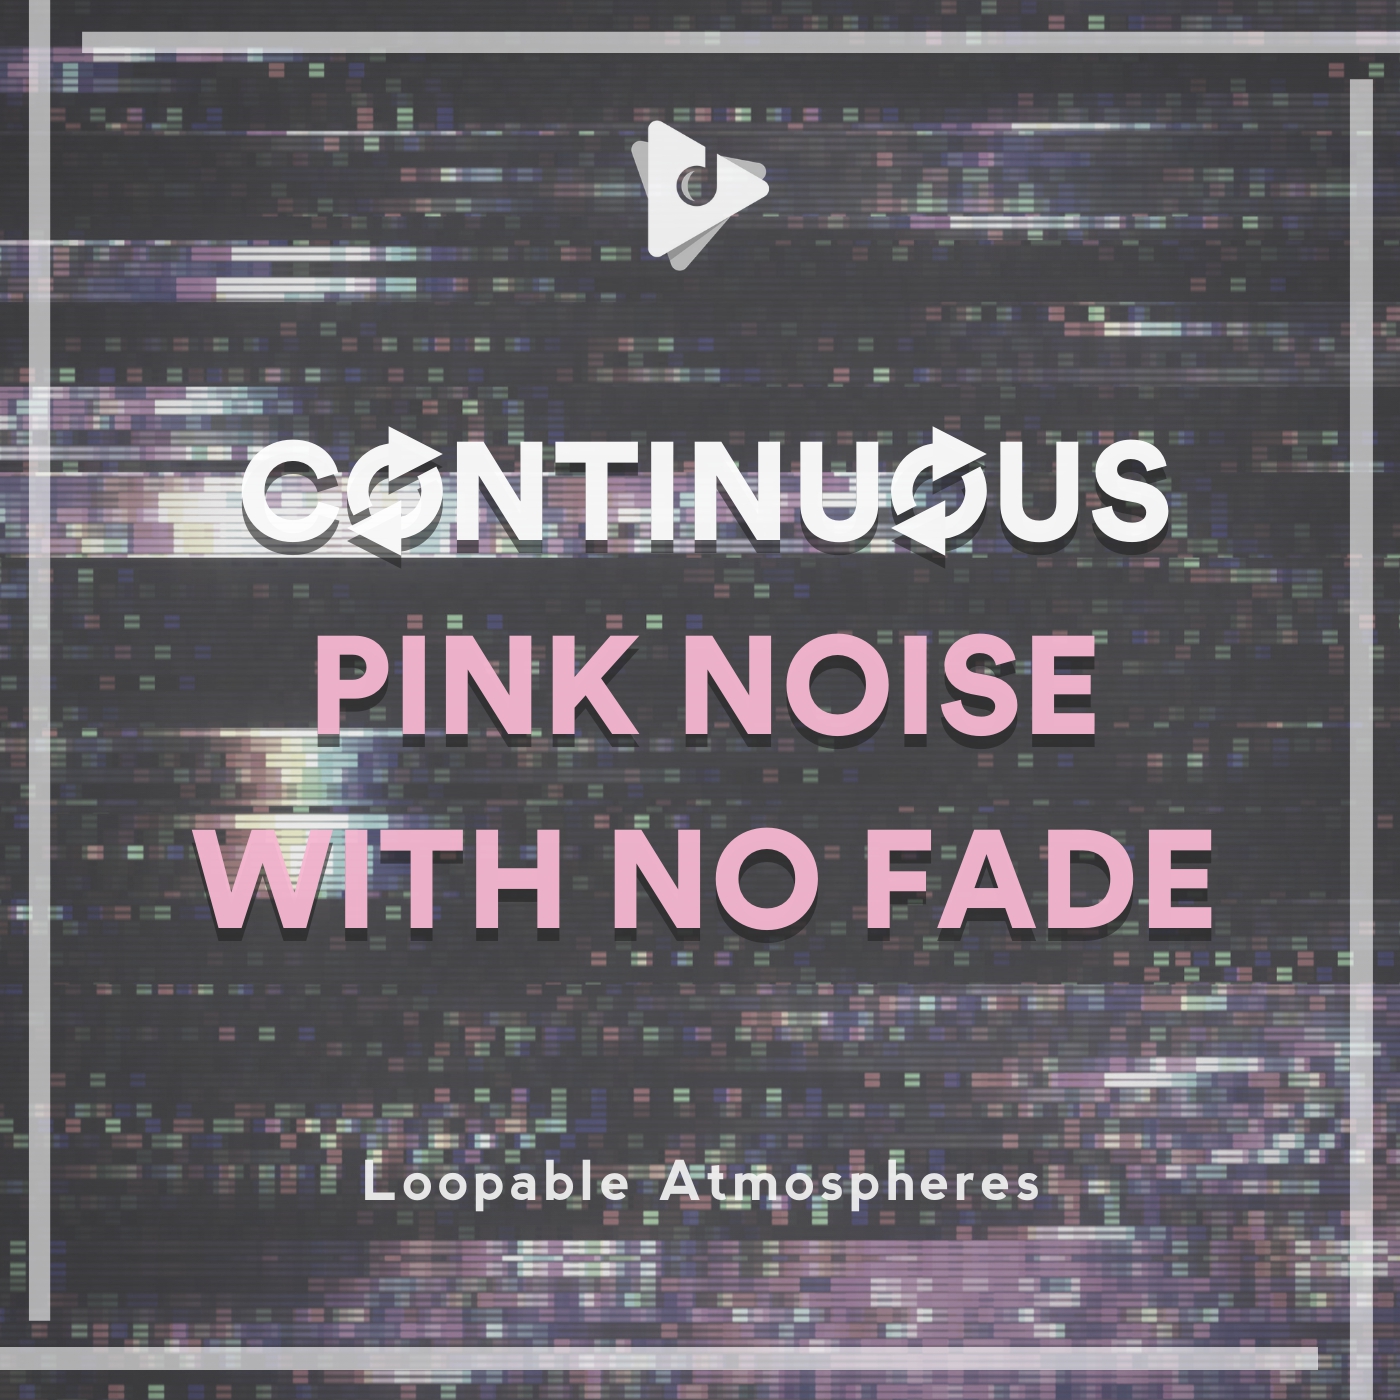 Continuous Pink Noise with No Fade